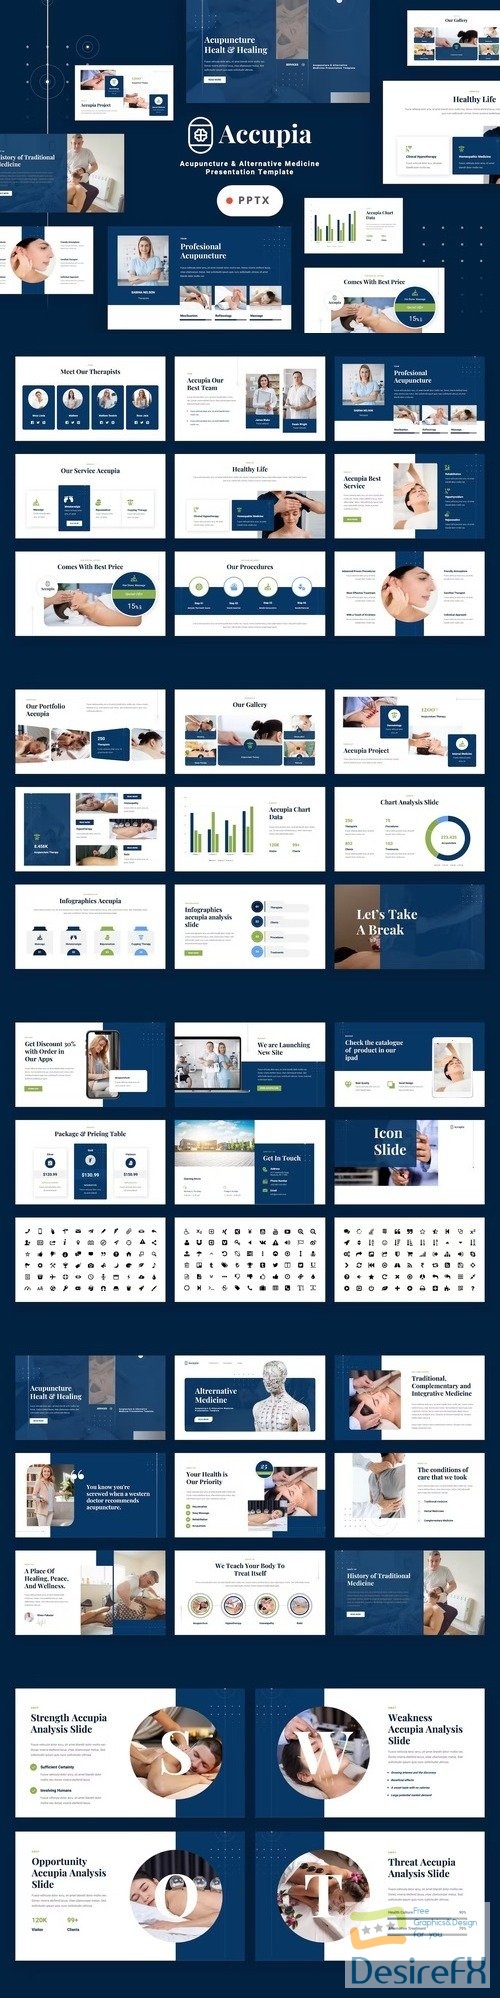 Accupia - Acupuncture Powerpoint Template